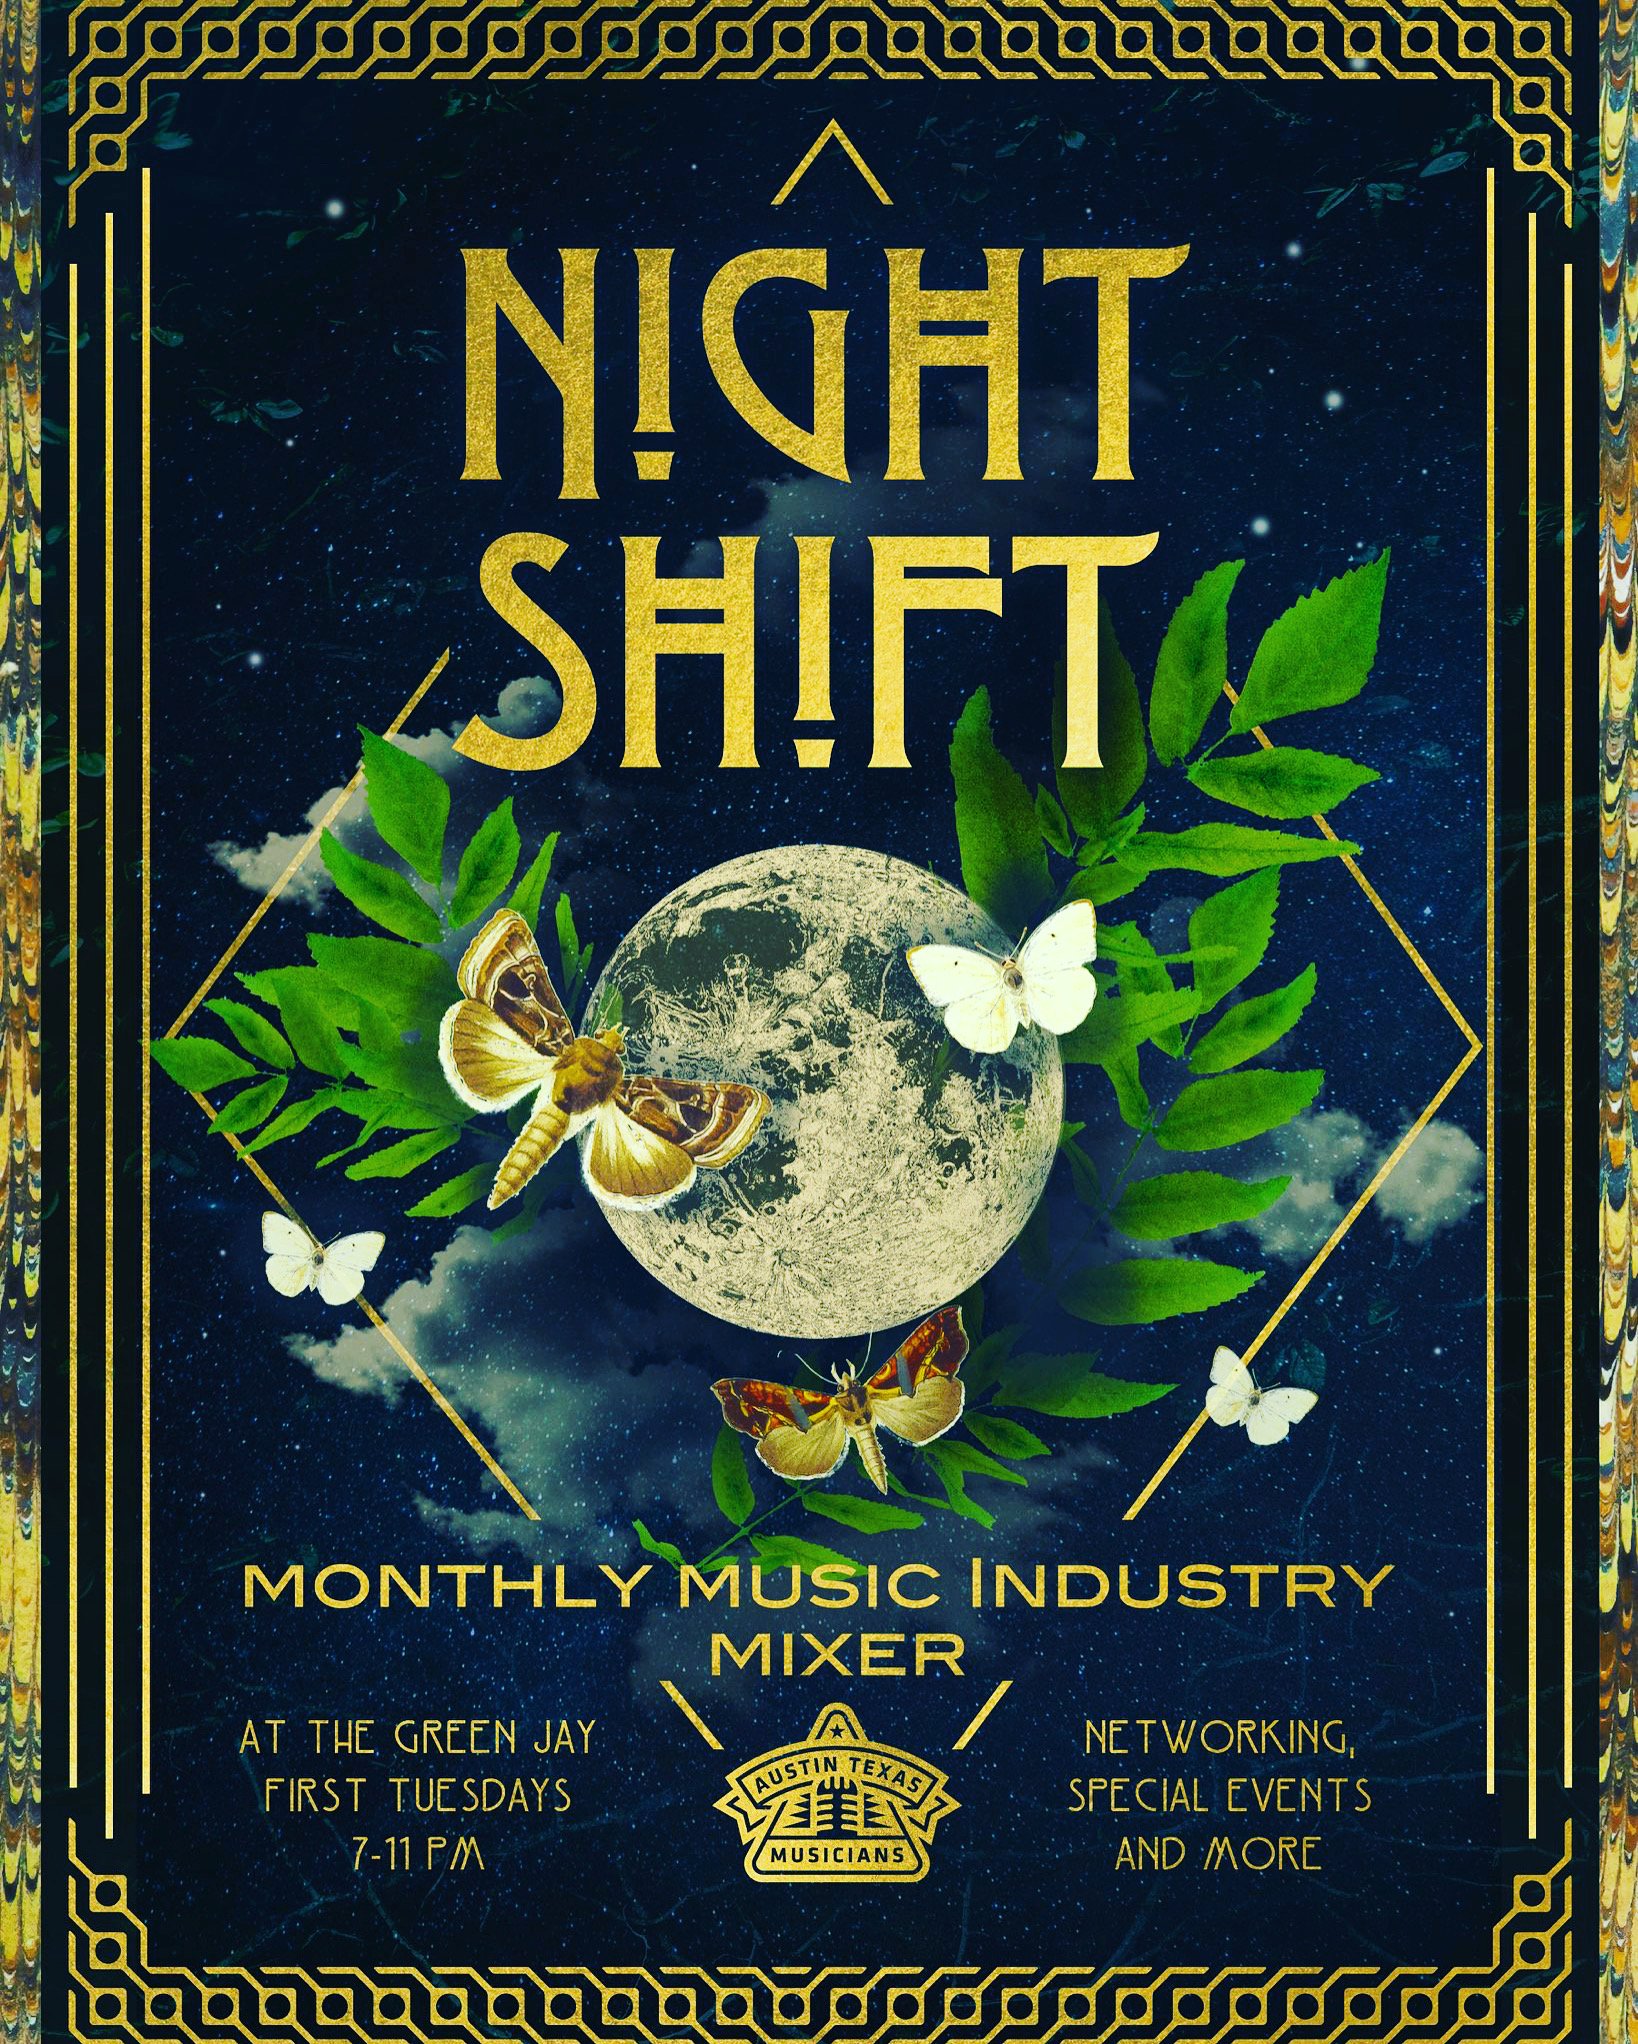 Austin Texas Musicians Presents: Night Shift: A Monthly Music Industry  Mixer — The Green Jay Bar and Venue